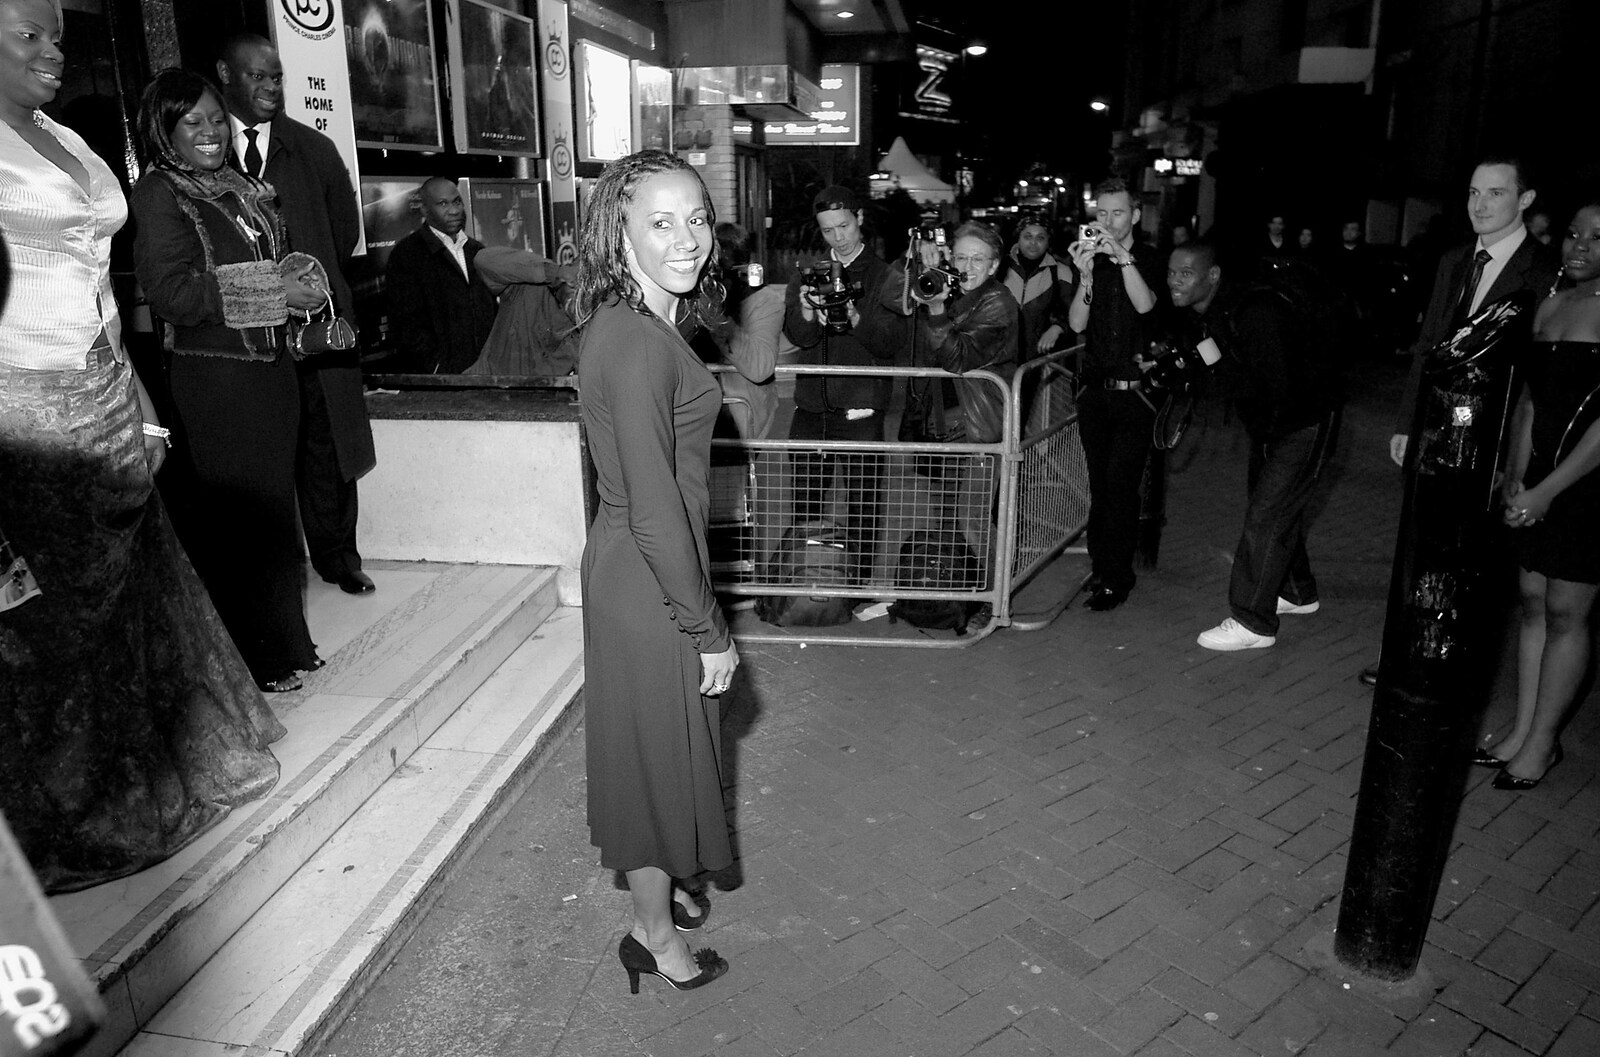 Dame Kelly Holmes again from Celebrity Snappers: Becoming a Papparazzo, Leicester Square, London - 9th November 2005